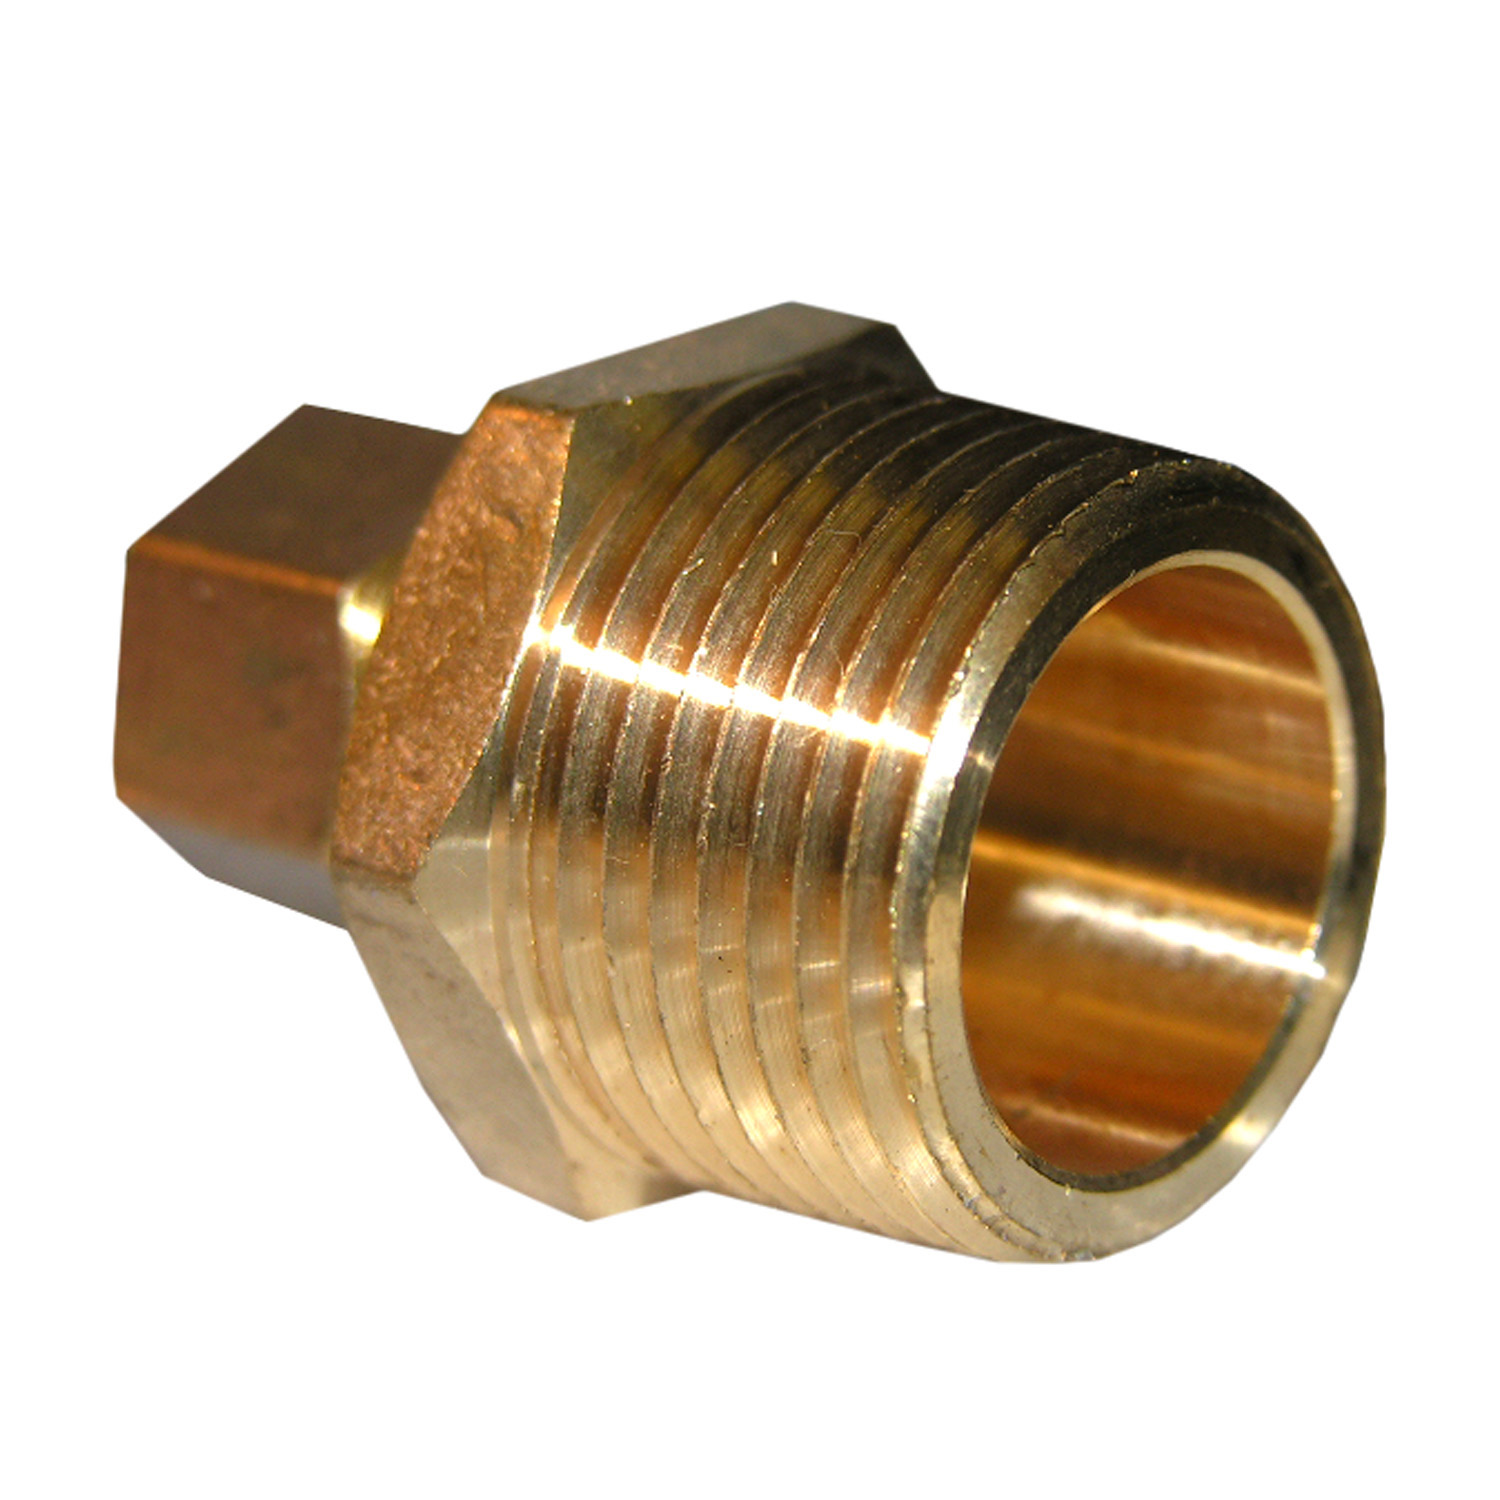 Shop Brass Pipe Compression Fittings at McCoy's